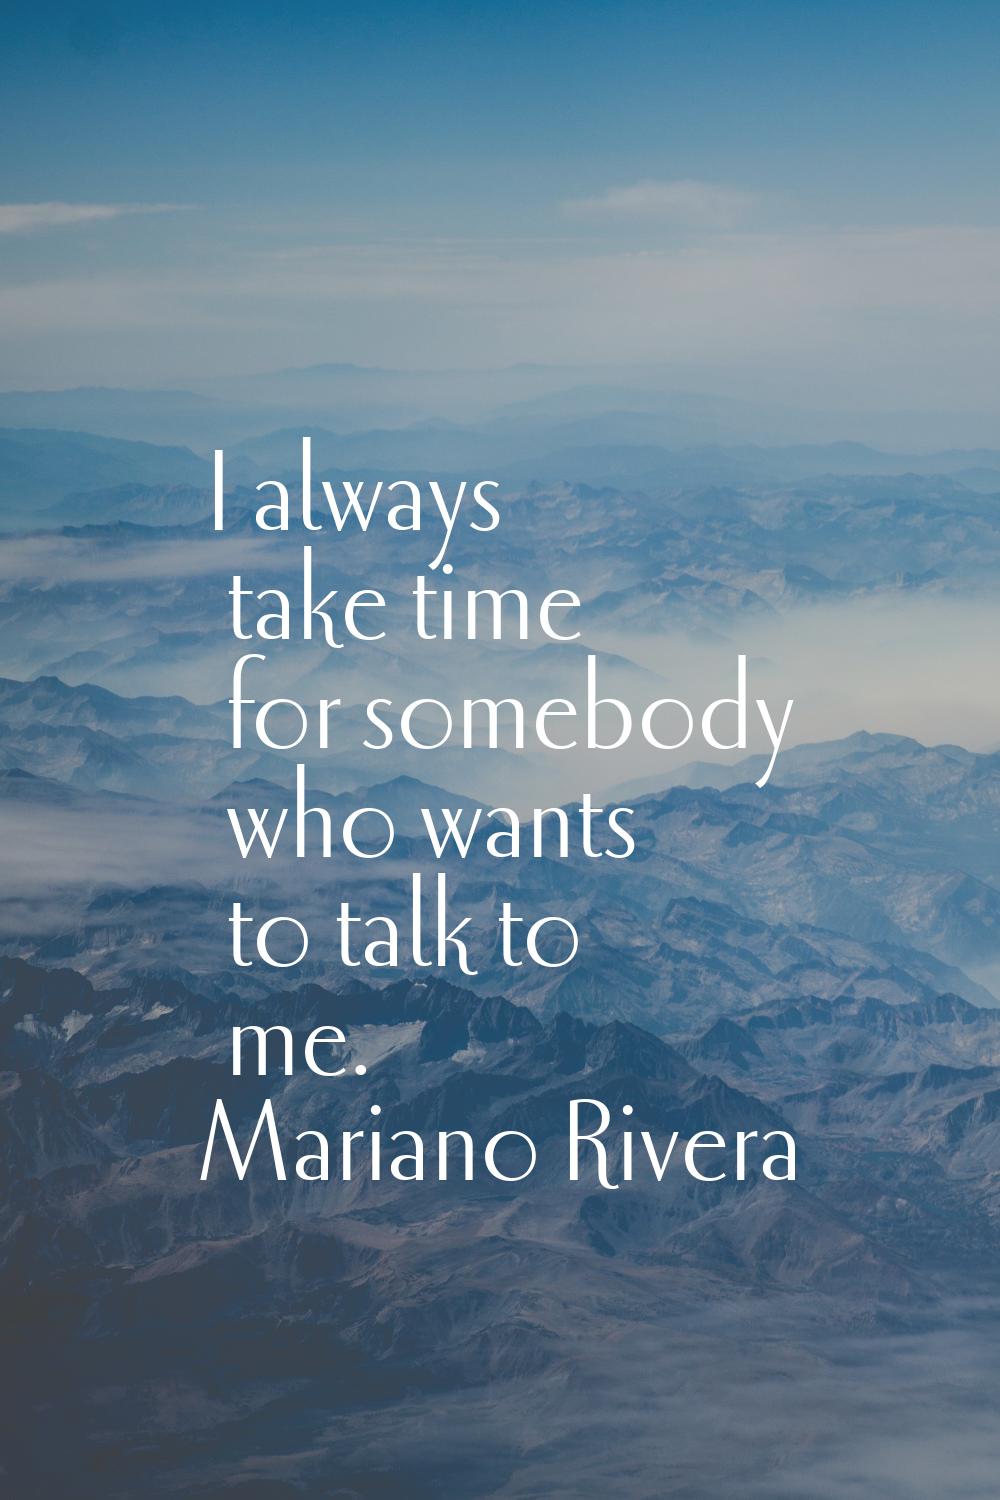 I always take time for somebody who wants to talk to me.